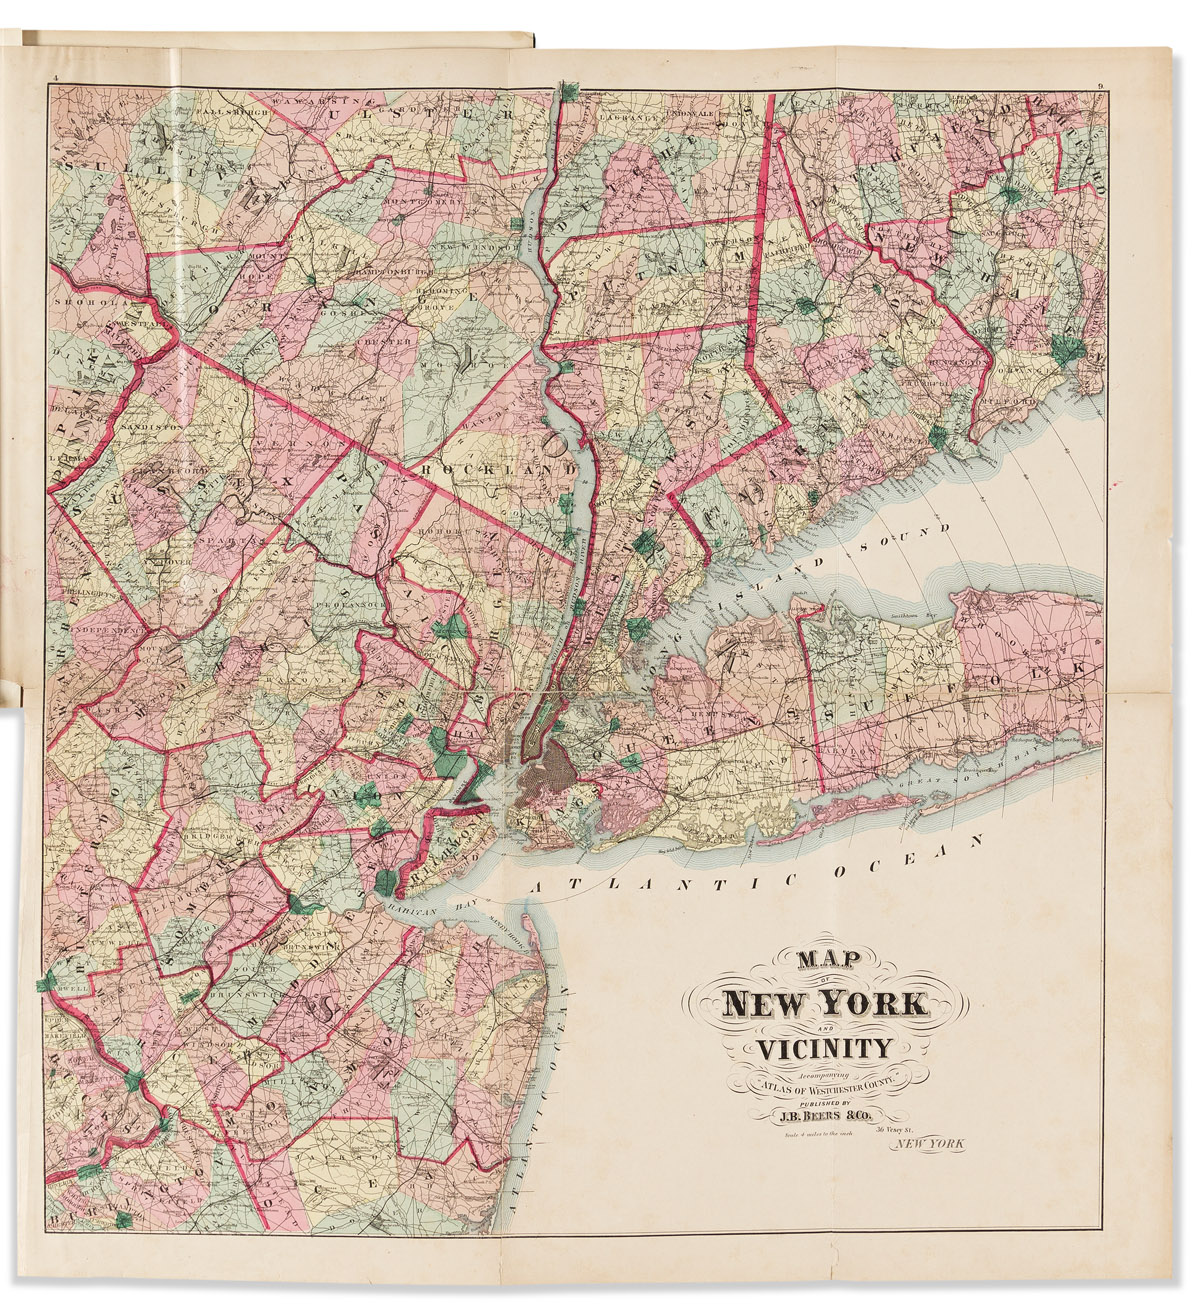 County Atlas of Westchester New York.